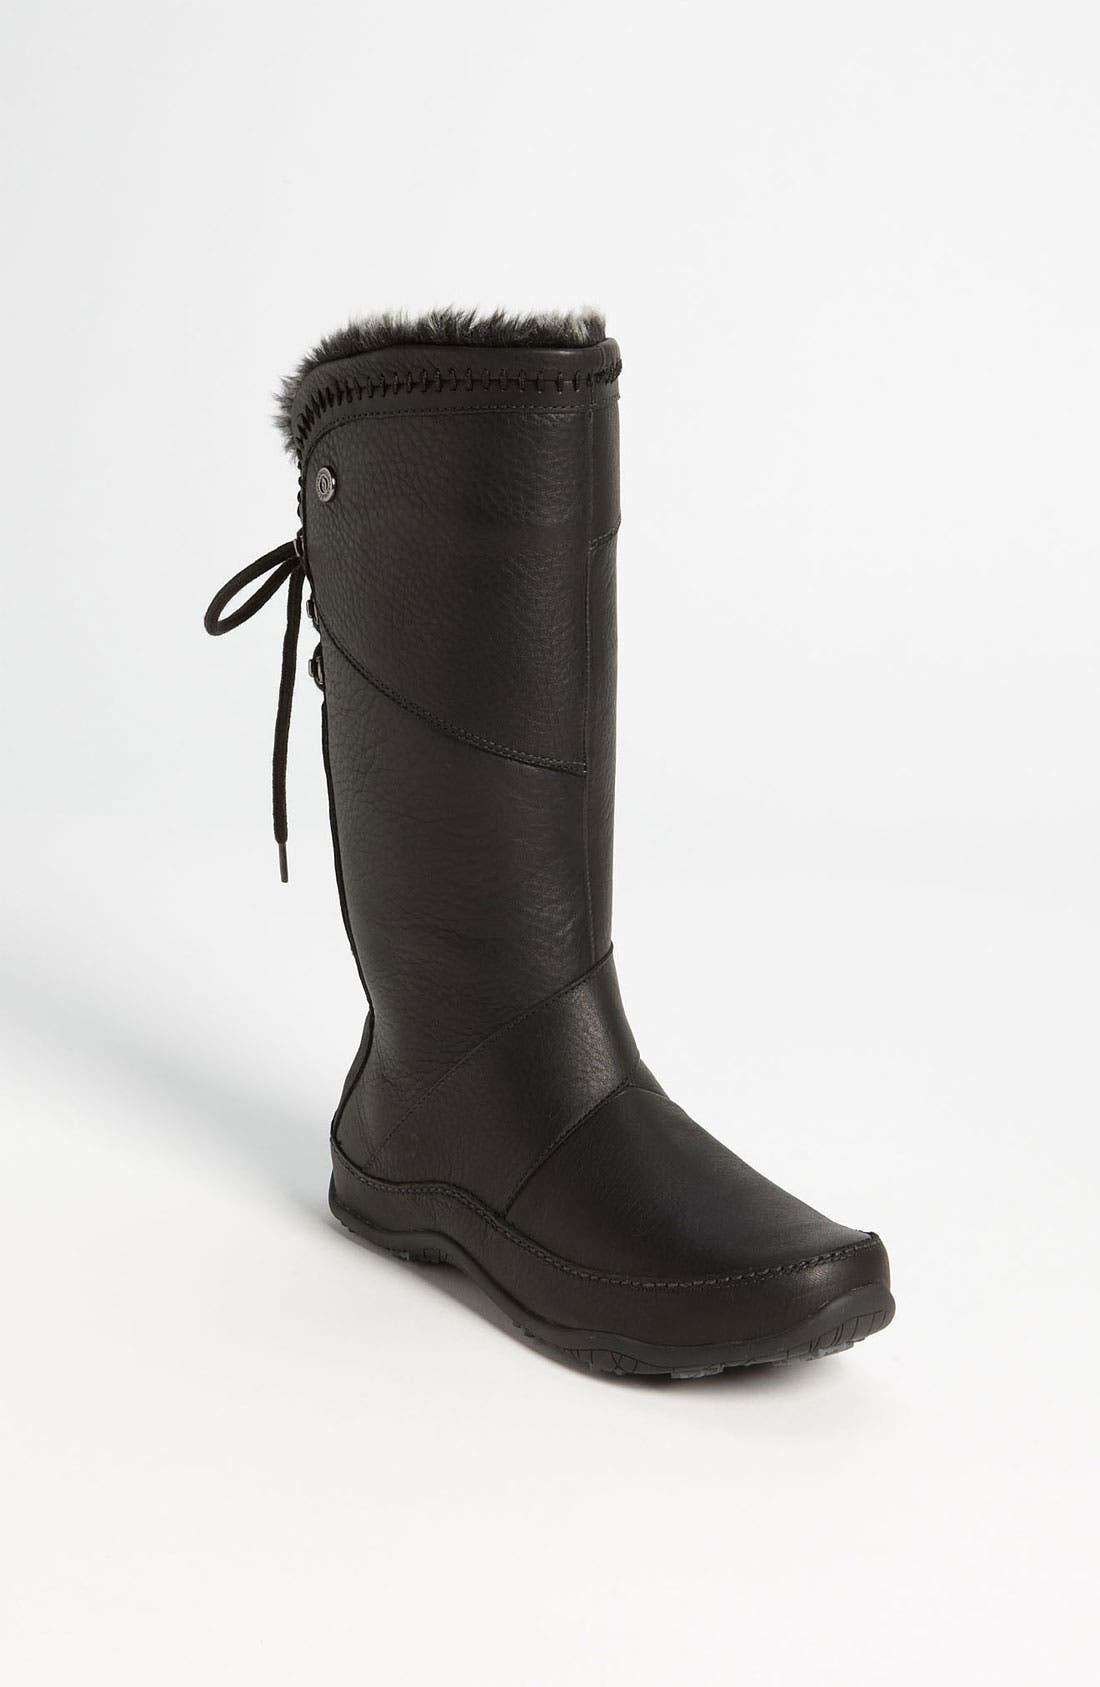 north face janey boots